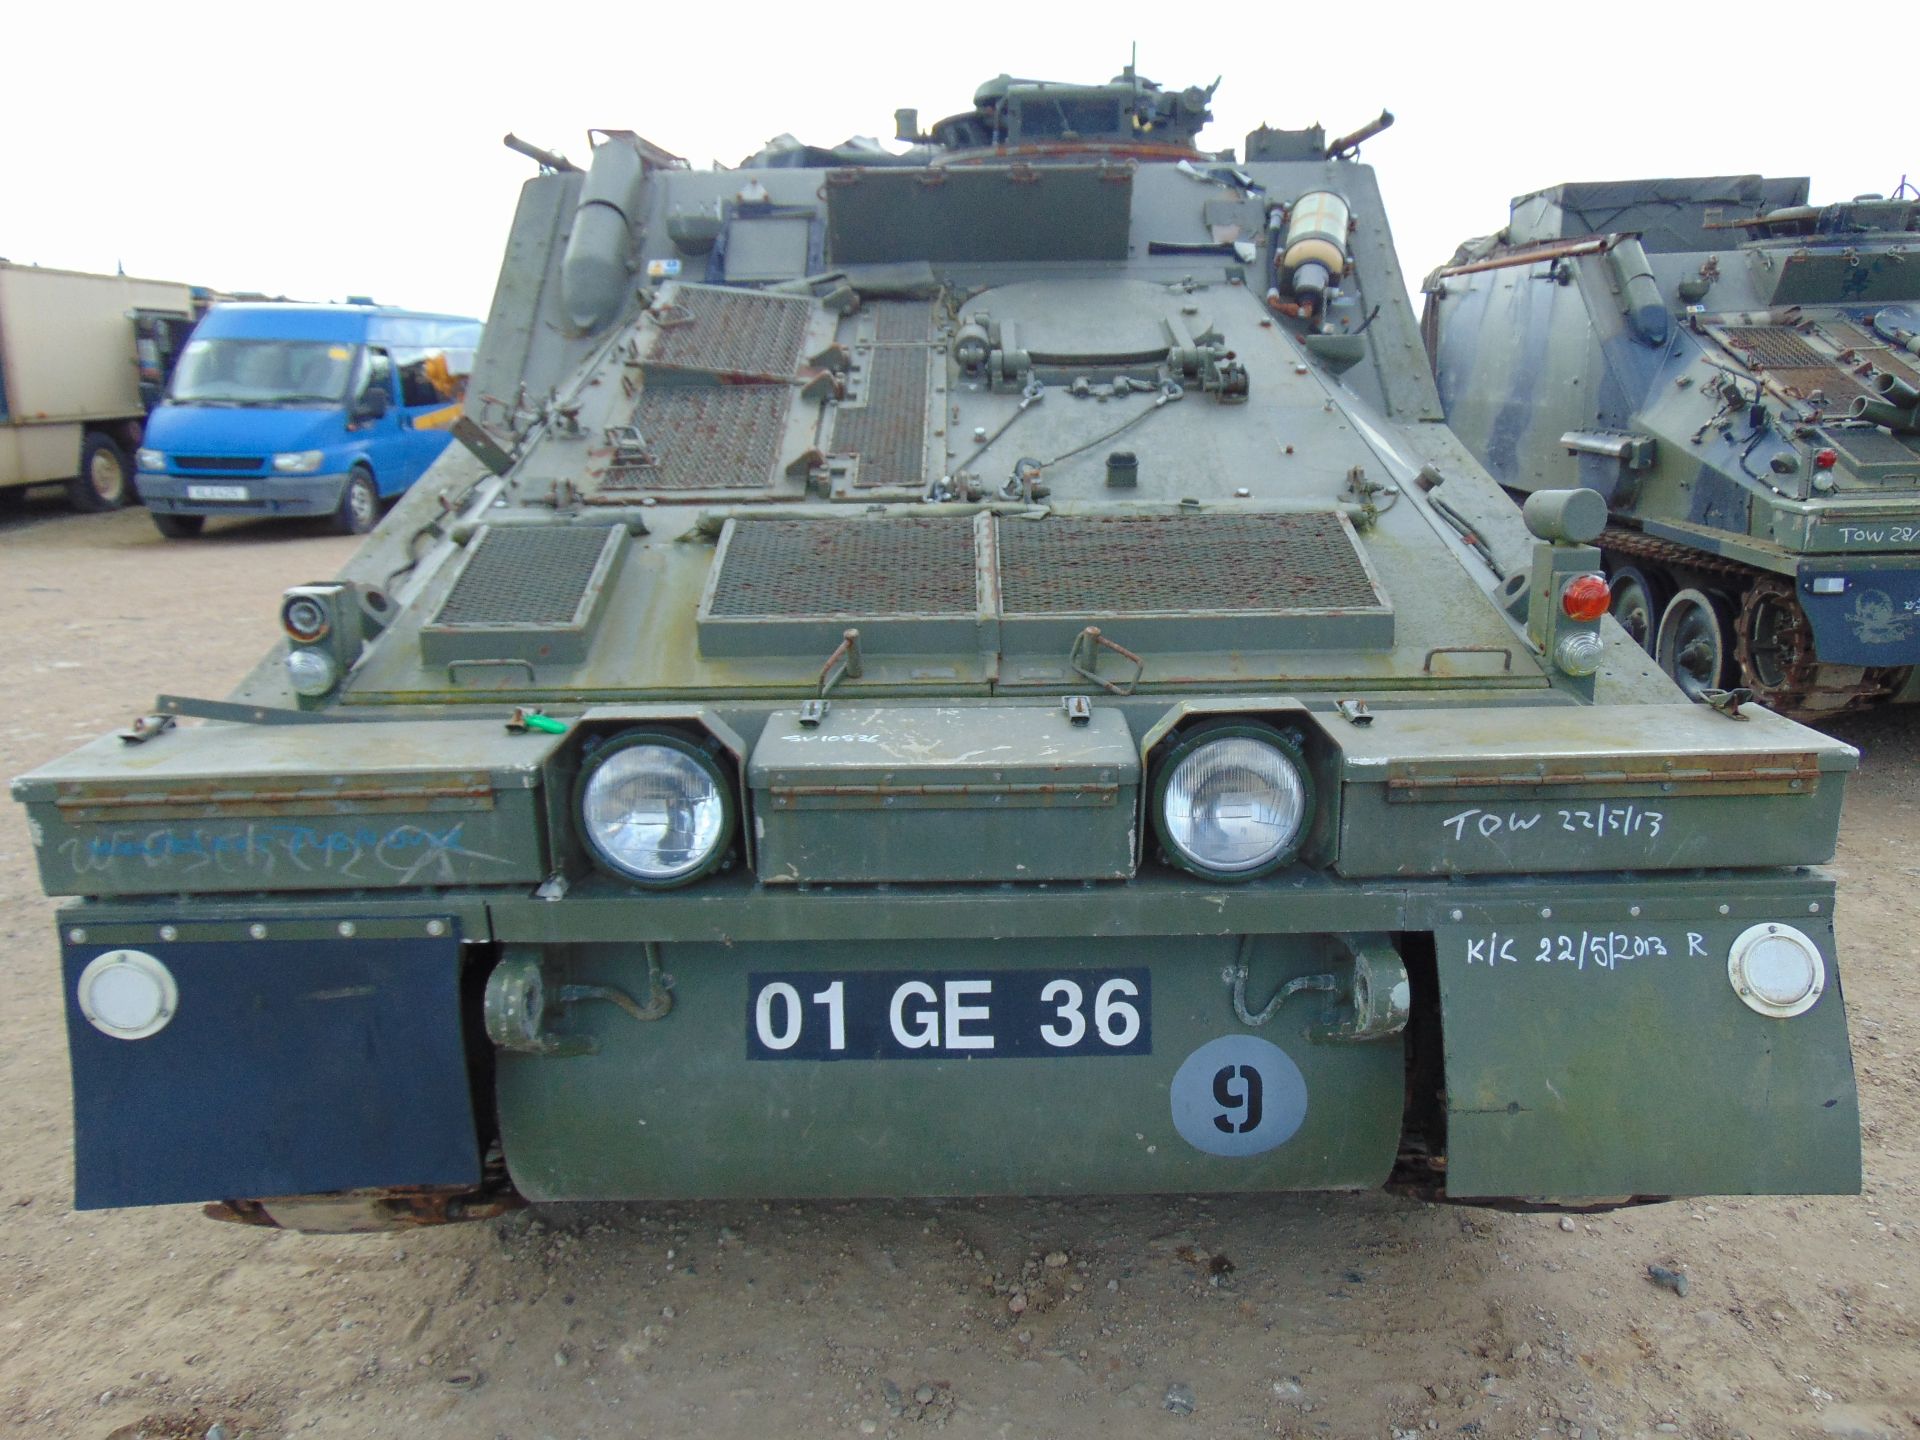 CVRT (Combat Vehicle Reconnaissance Tracked) FV105 Sultan Armoured Personnel Carrier - Image 2 of 25